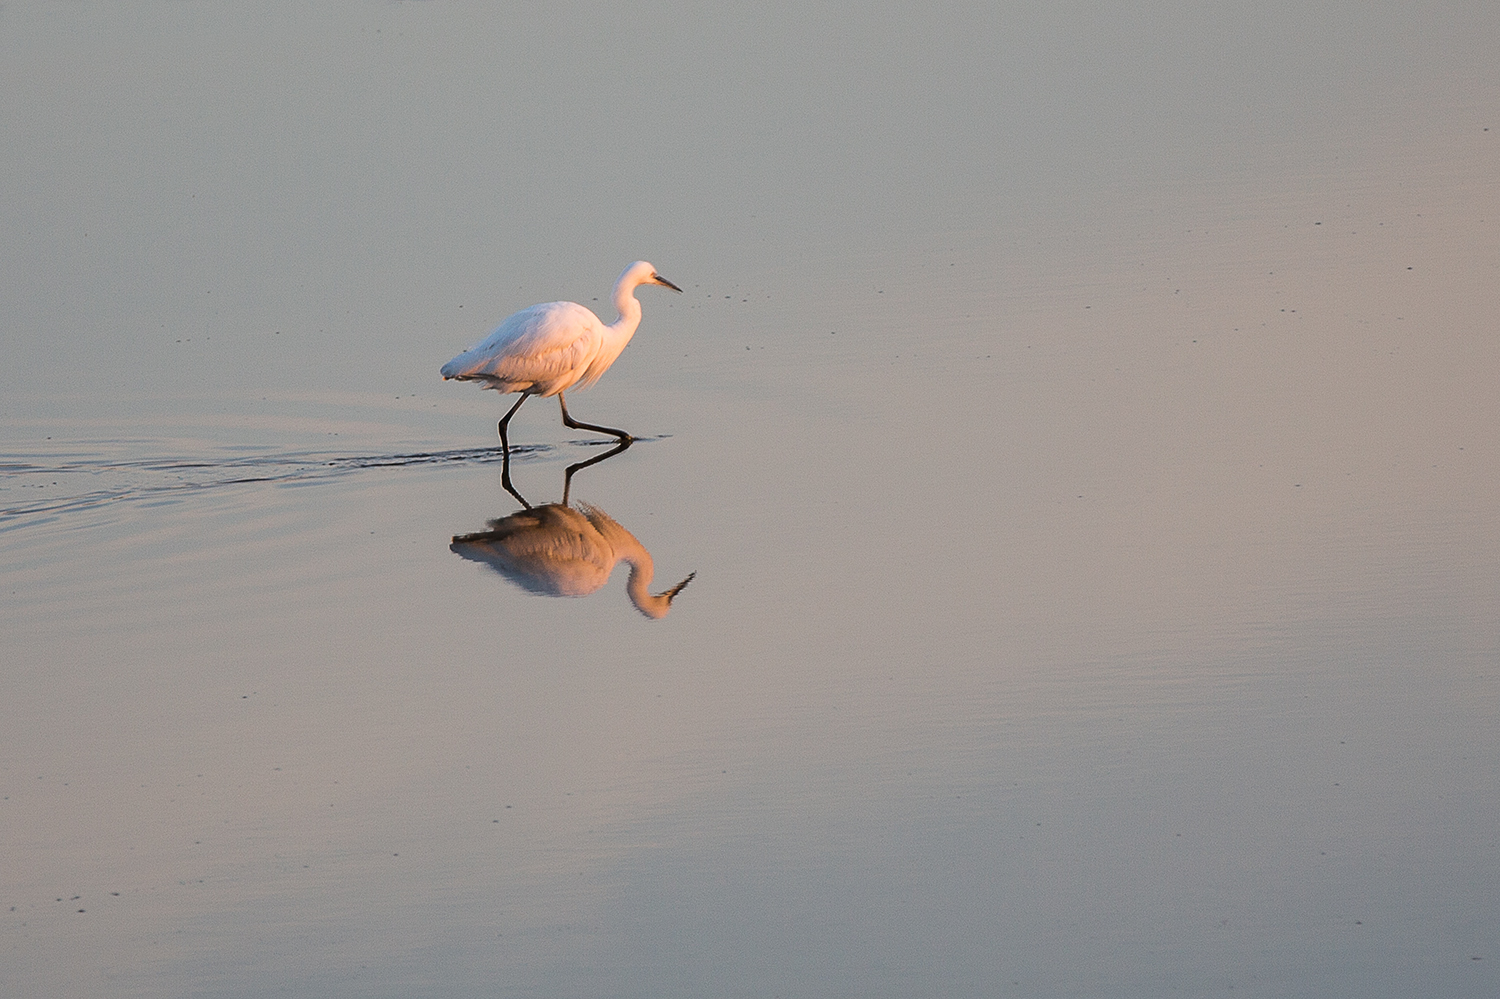 a lone bird walking on the water with its reflection in the sand